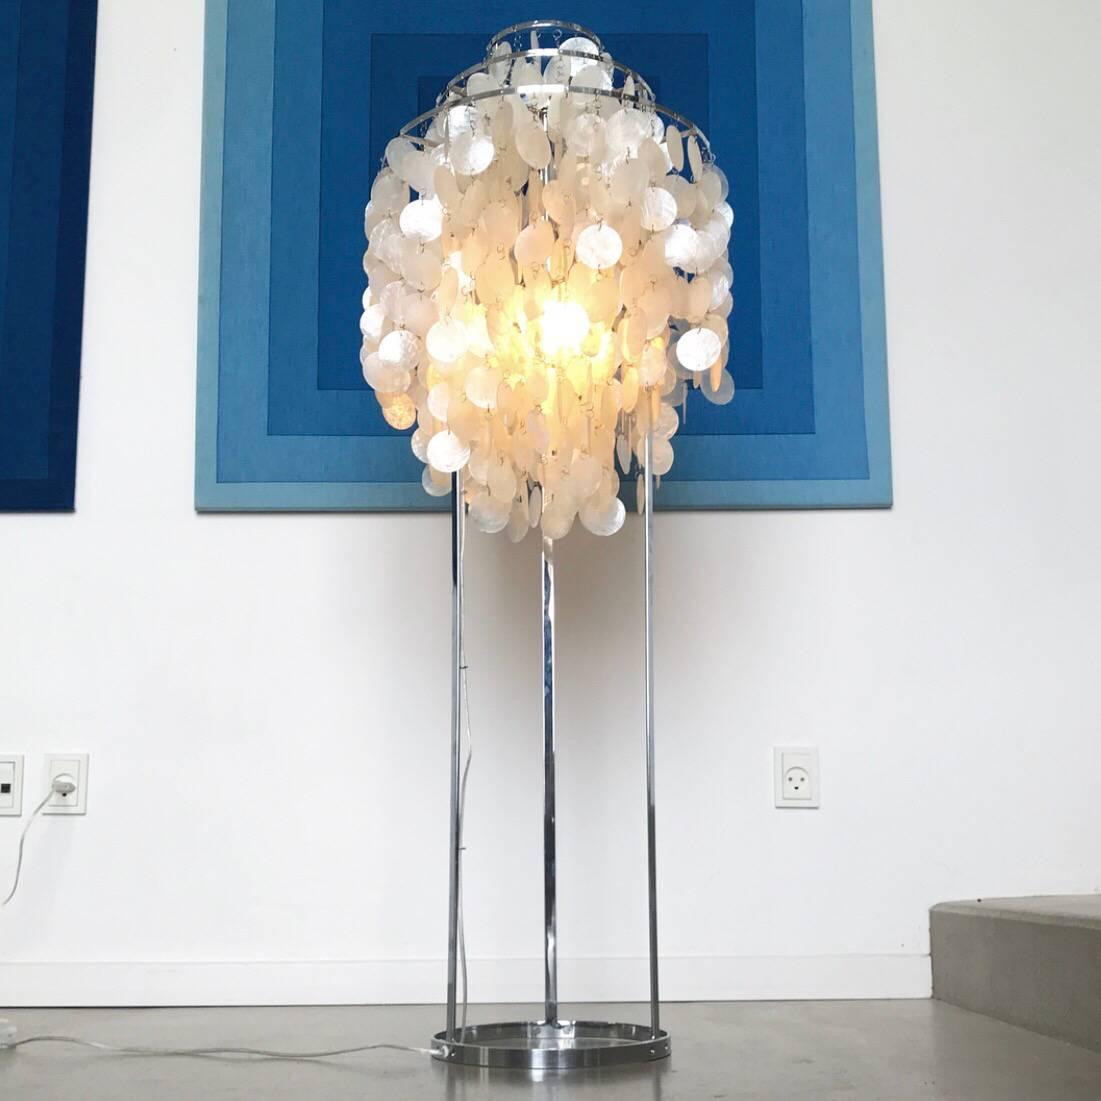 Designed in 1964 the FUN 1STM floor lamp is part of a whole variety of different ceiling lights, table lights and than this floor lamp. 

The shells are made from 